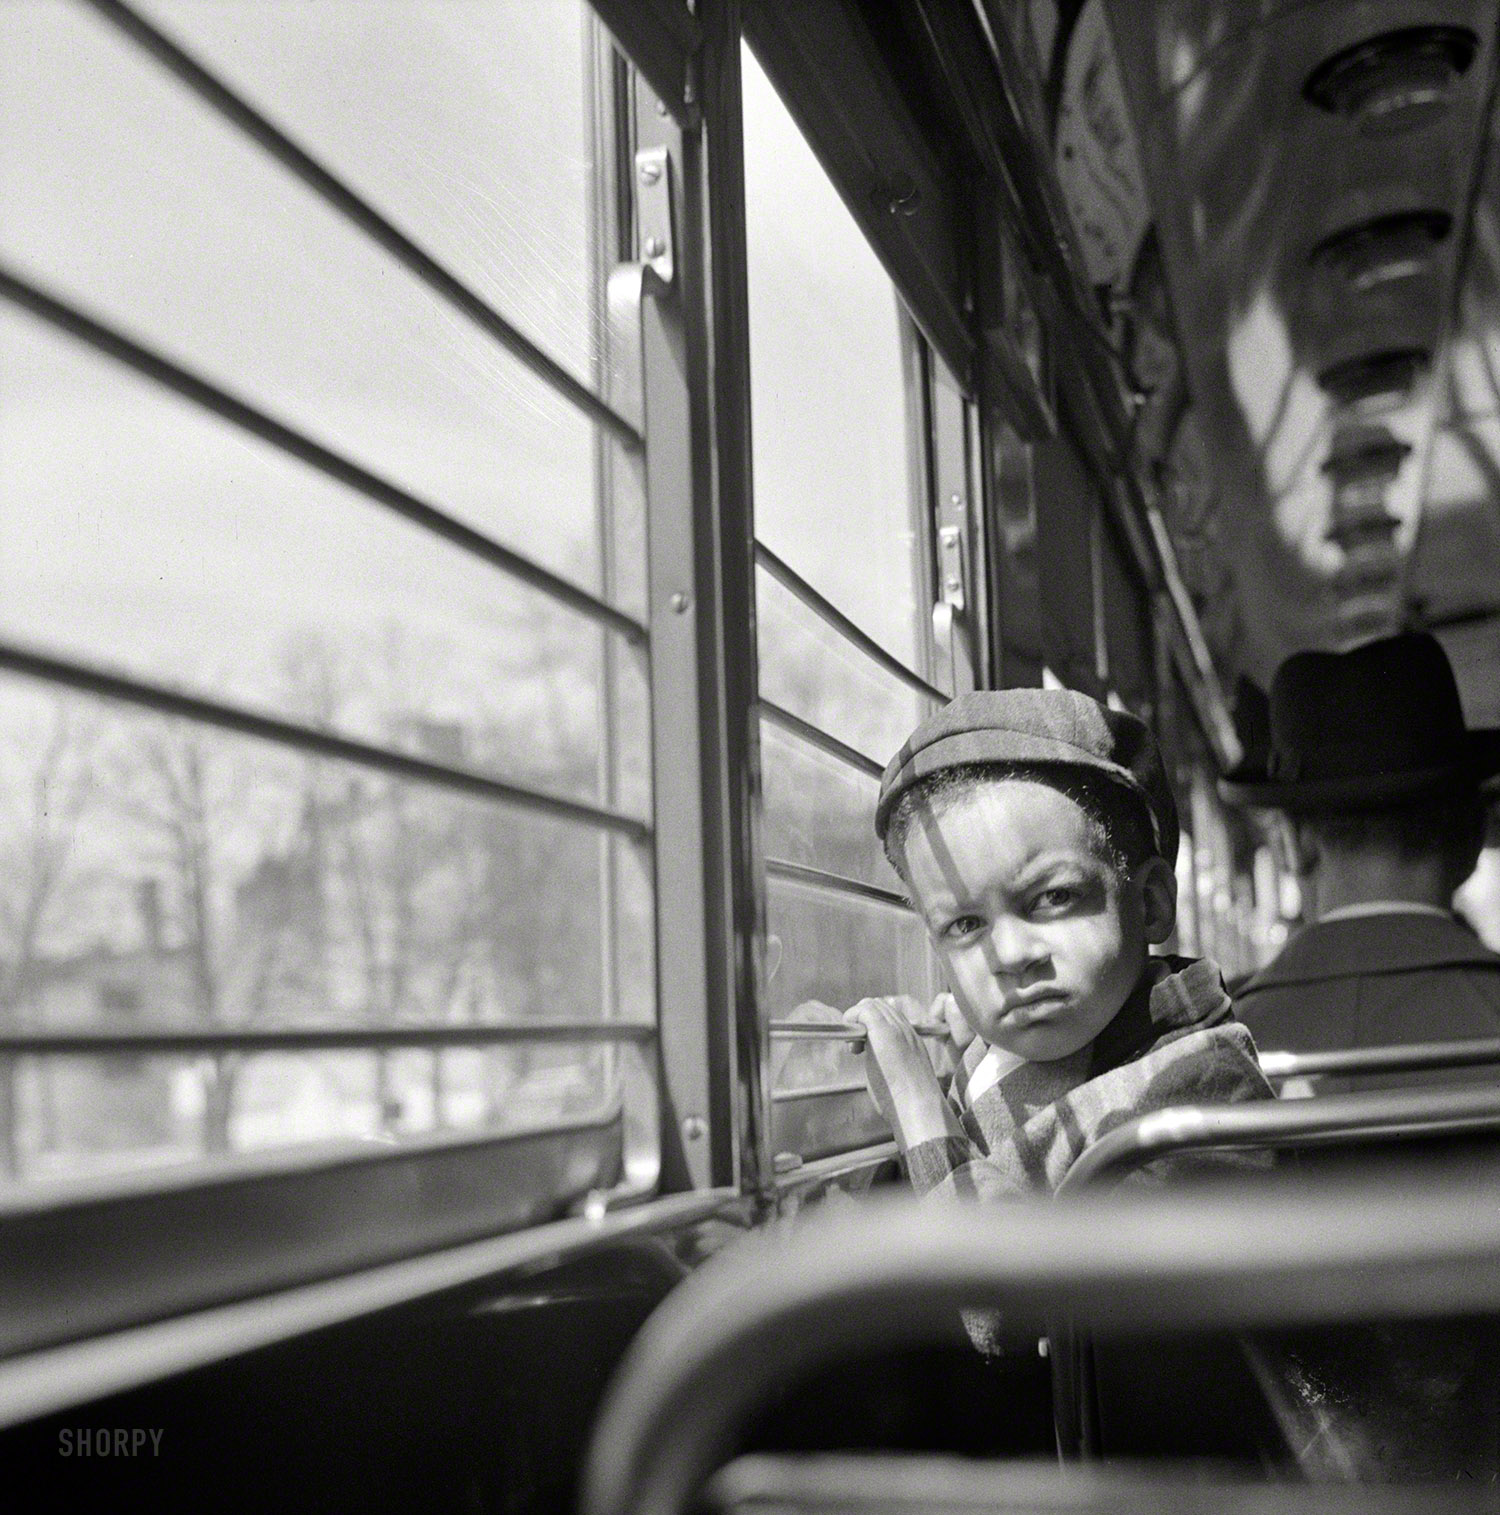 April 1943. Washington, D.C. "Little boy riding on a streetcar." Photo by Esther Bubley for the Office of War Information. View full size.